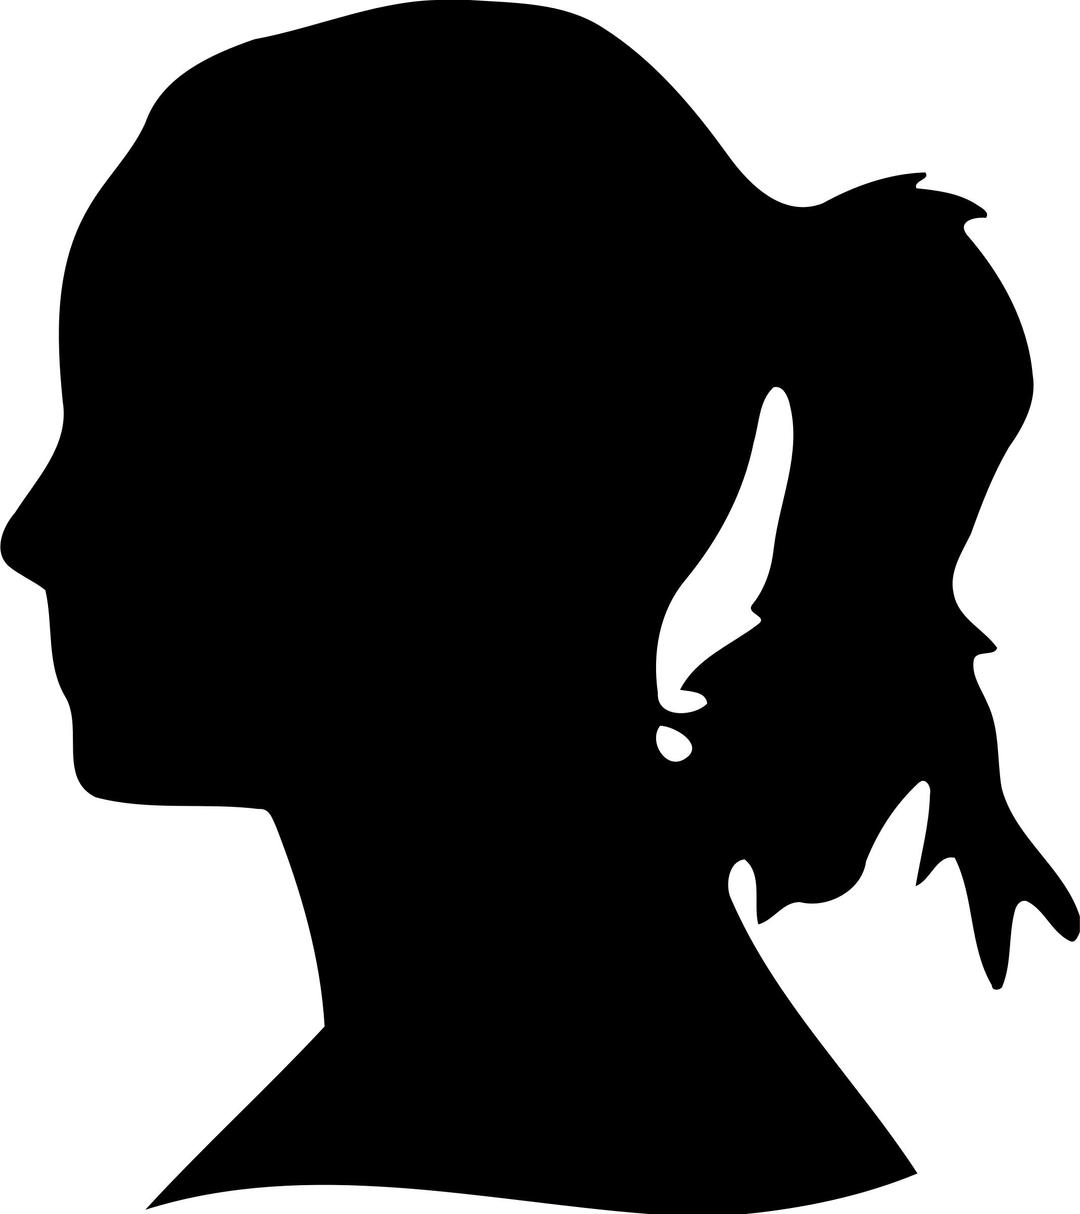 Woman's head silhouette 4 png transparent